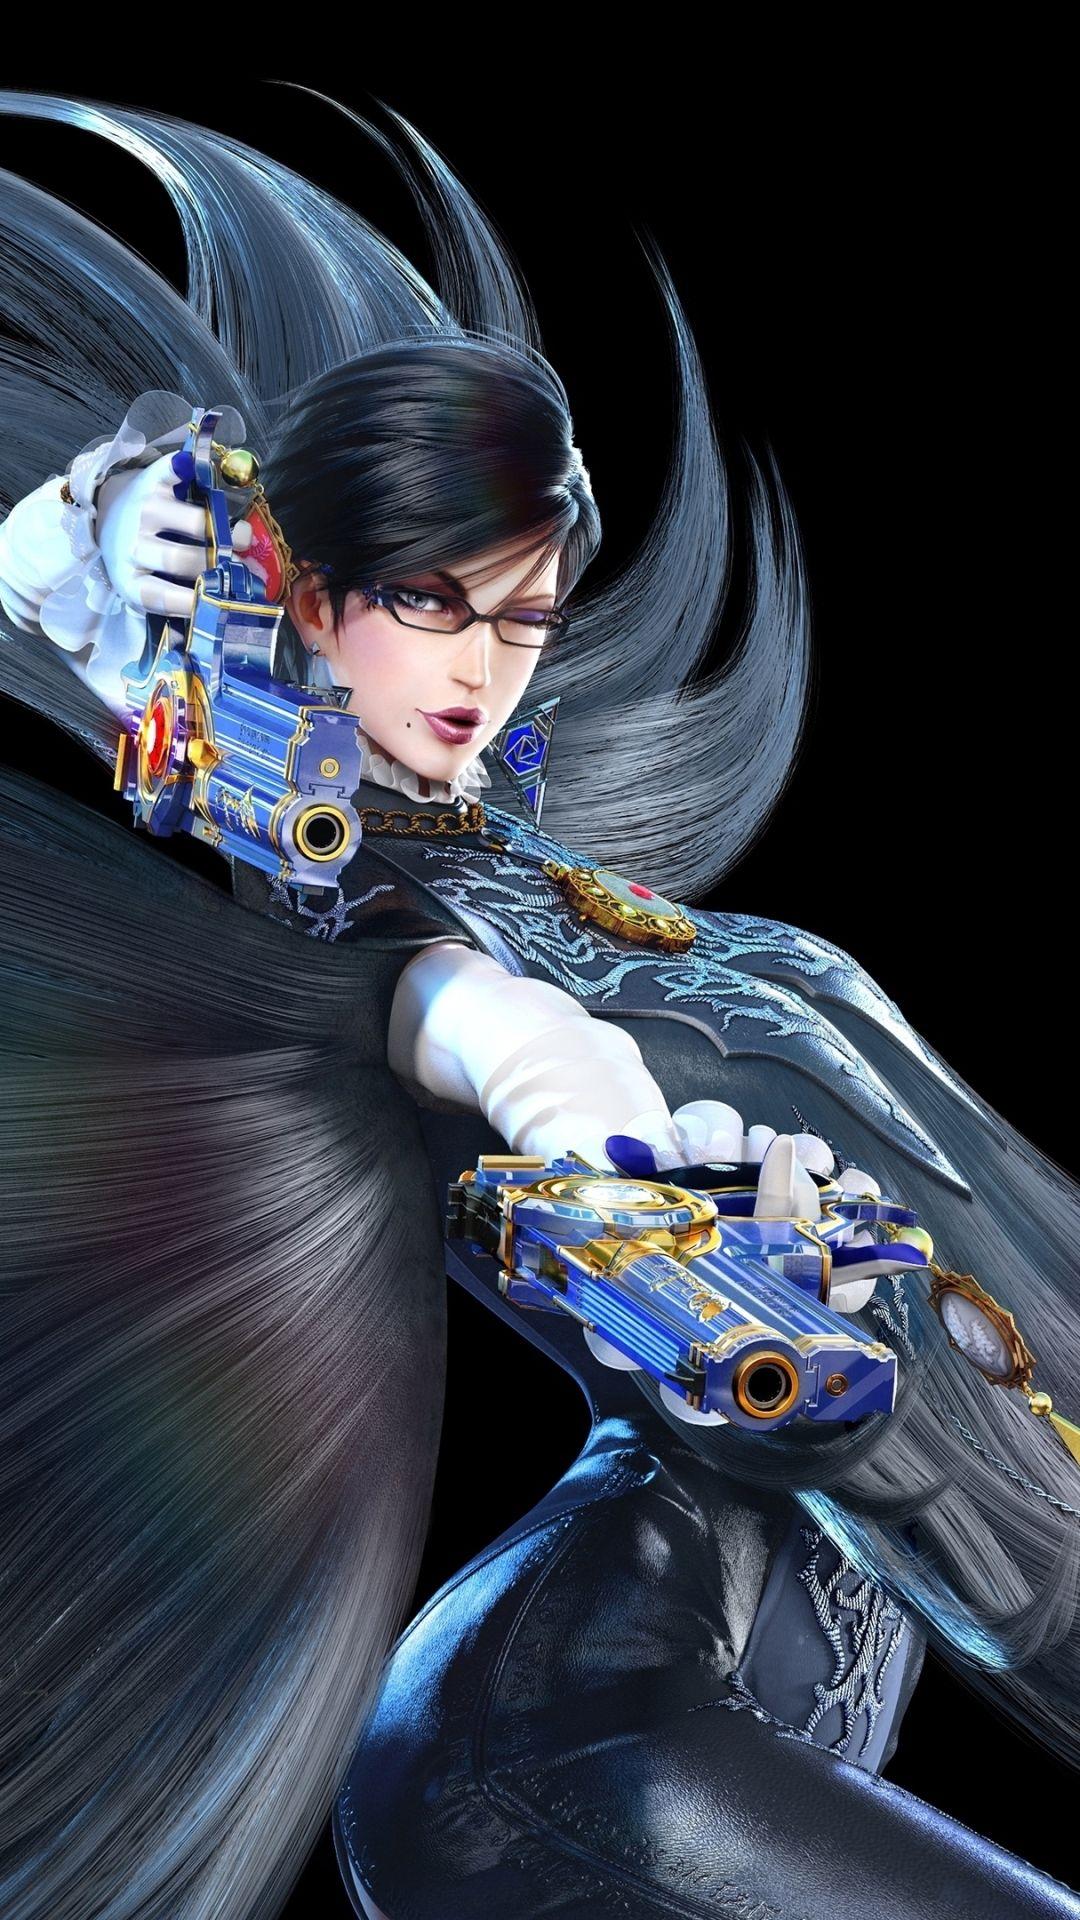 download bayonetta 2 for free